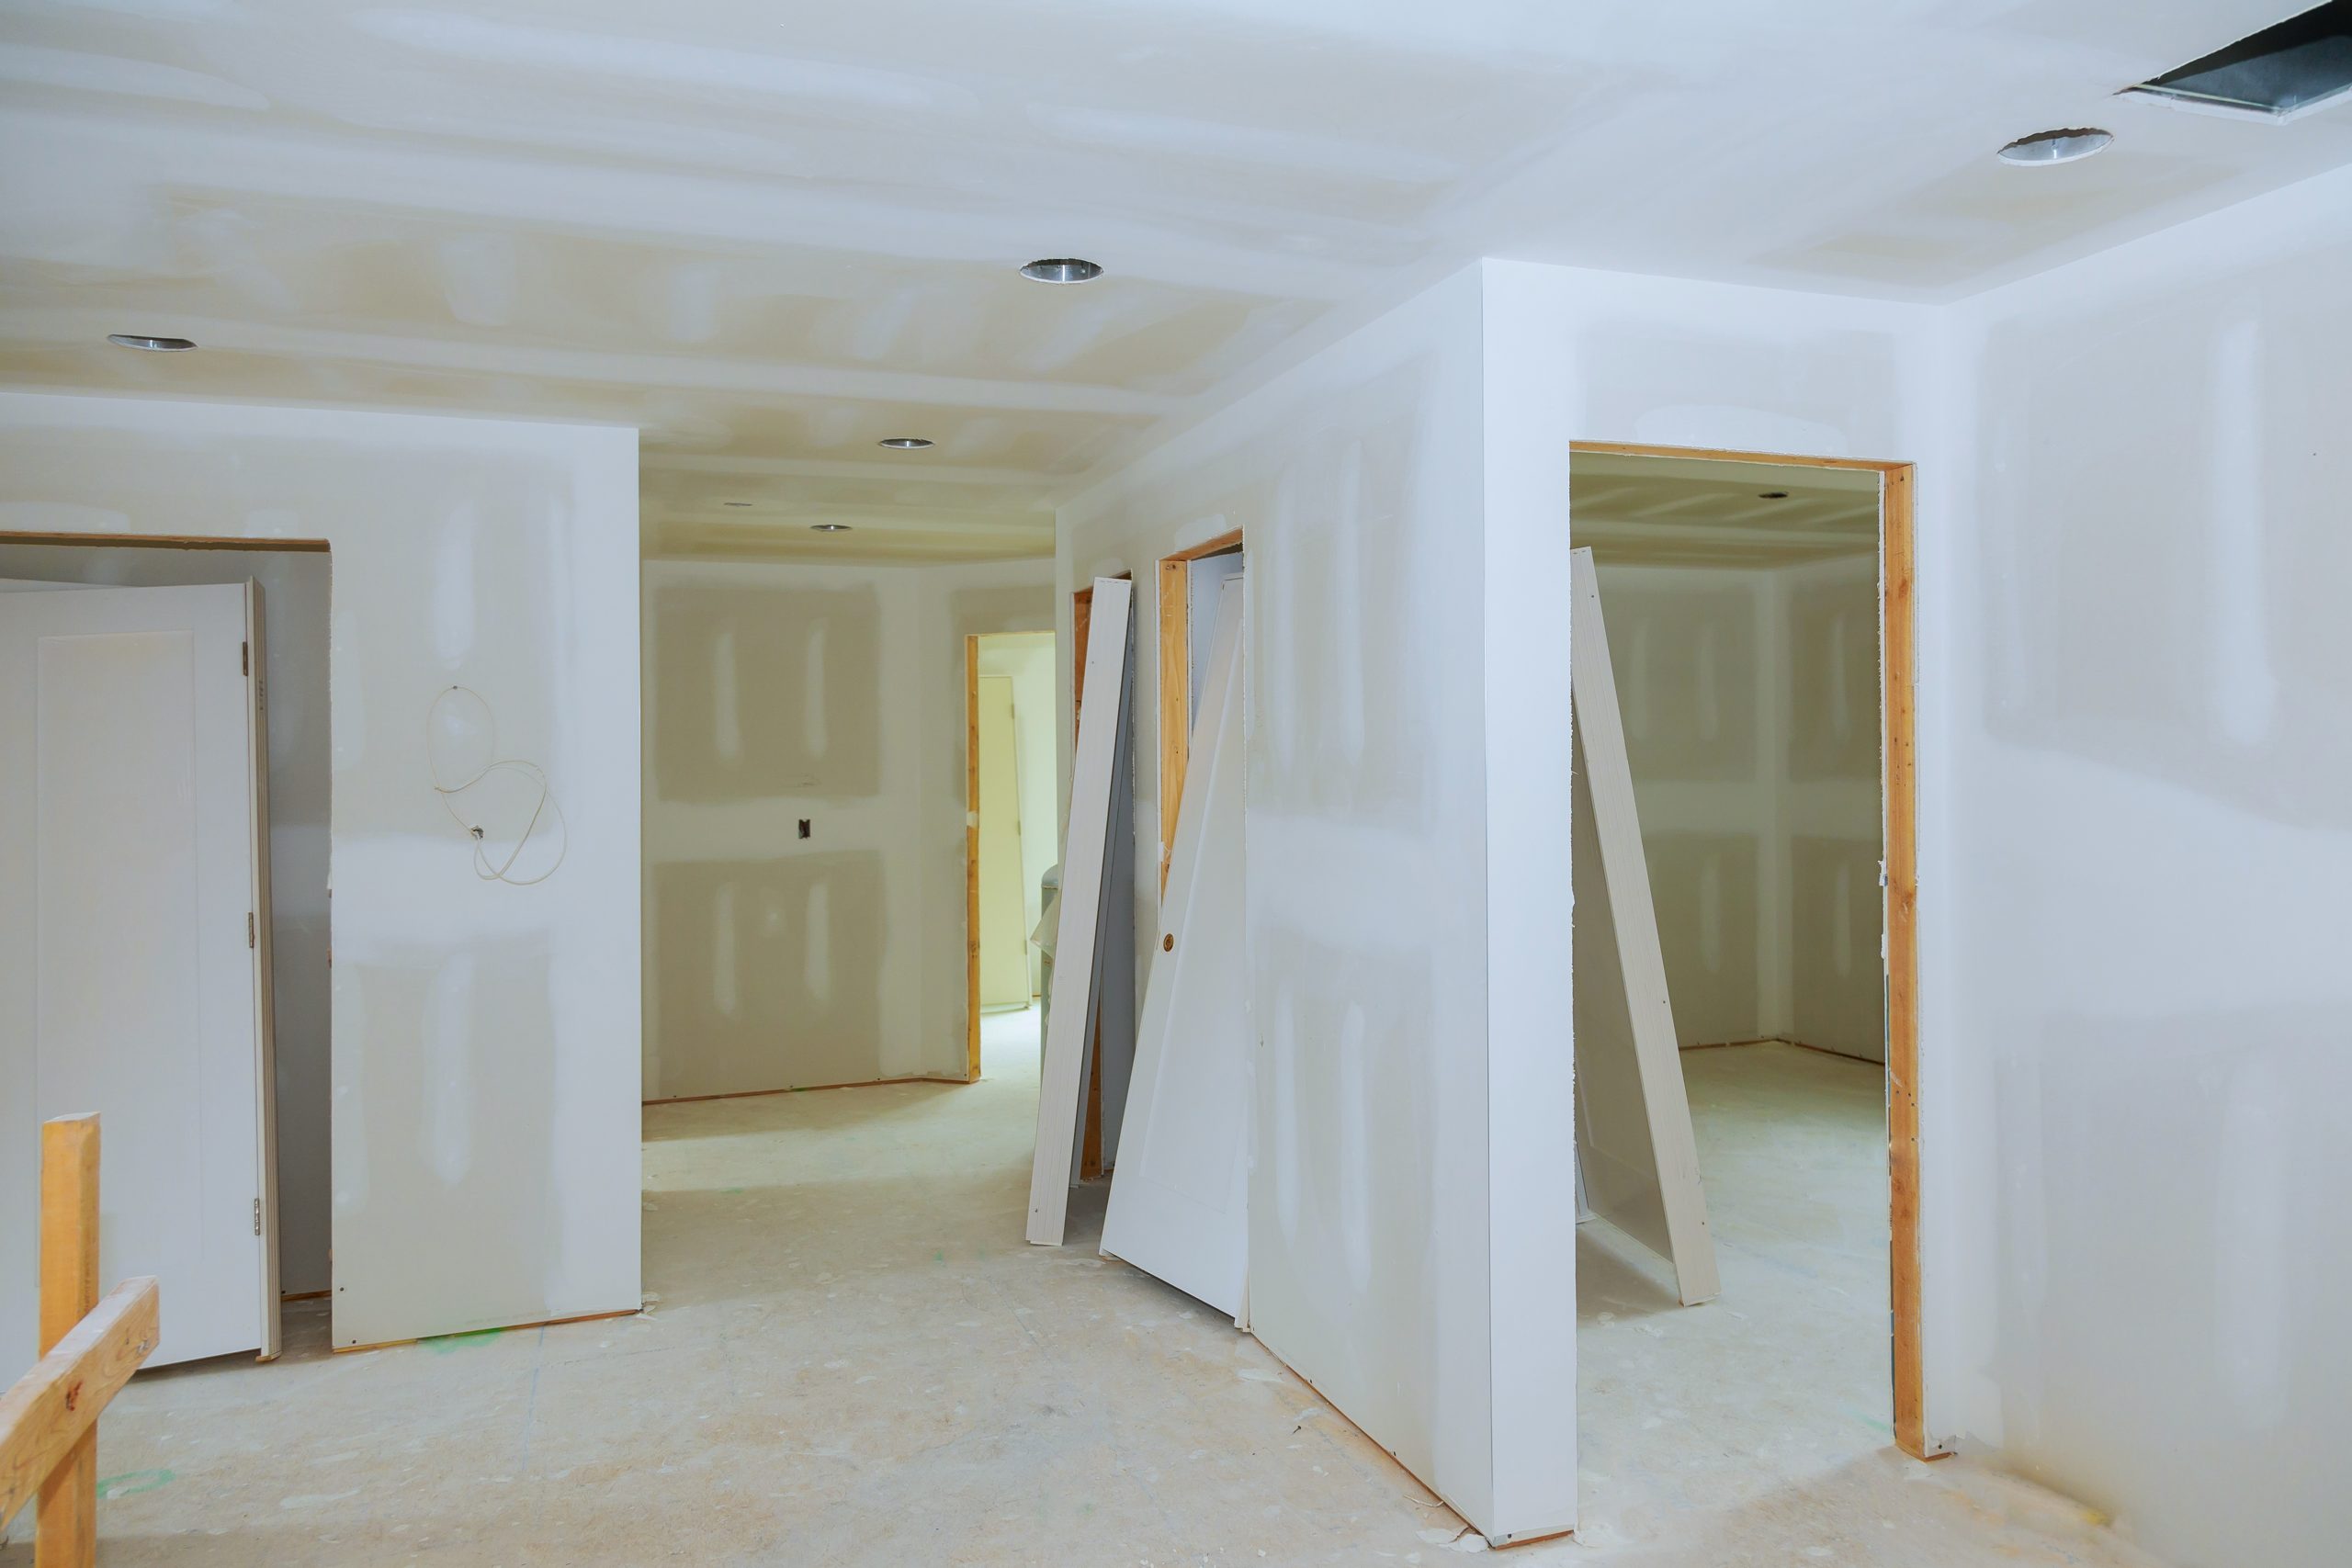 New Construction of Drywall Plasterboard Interior Room